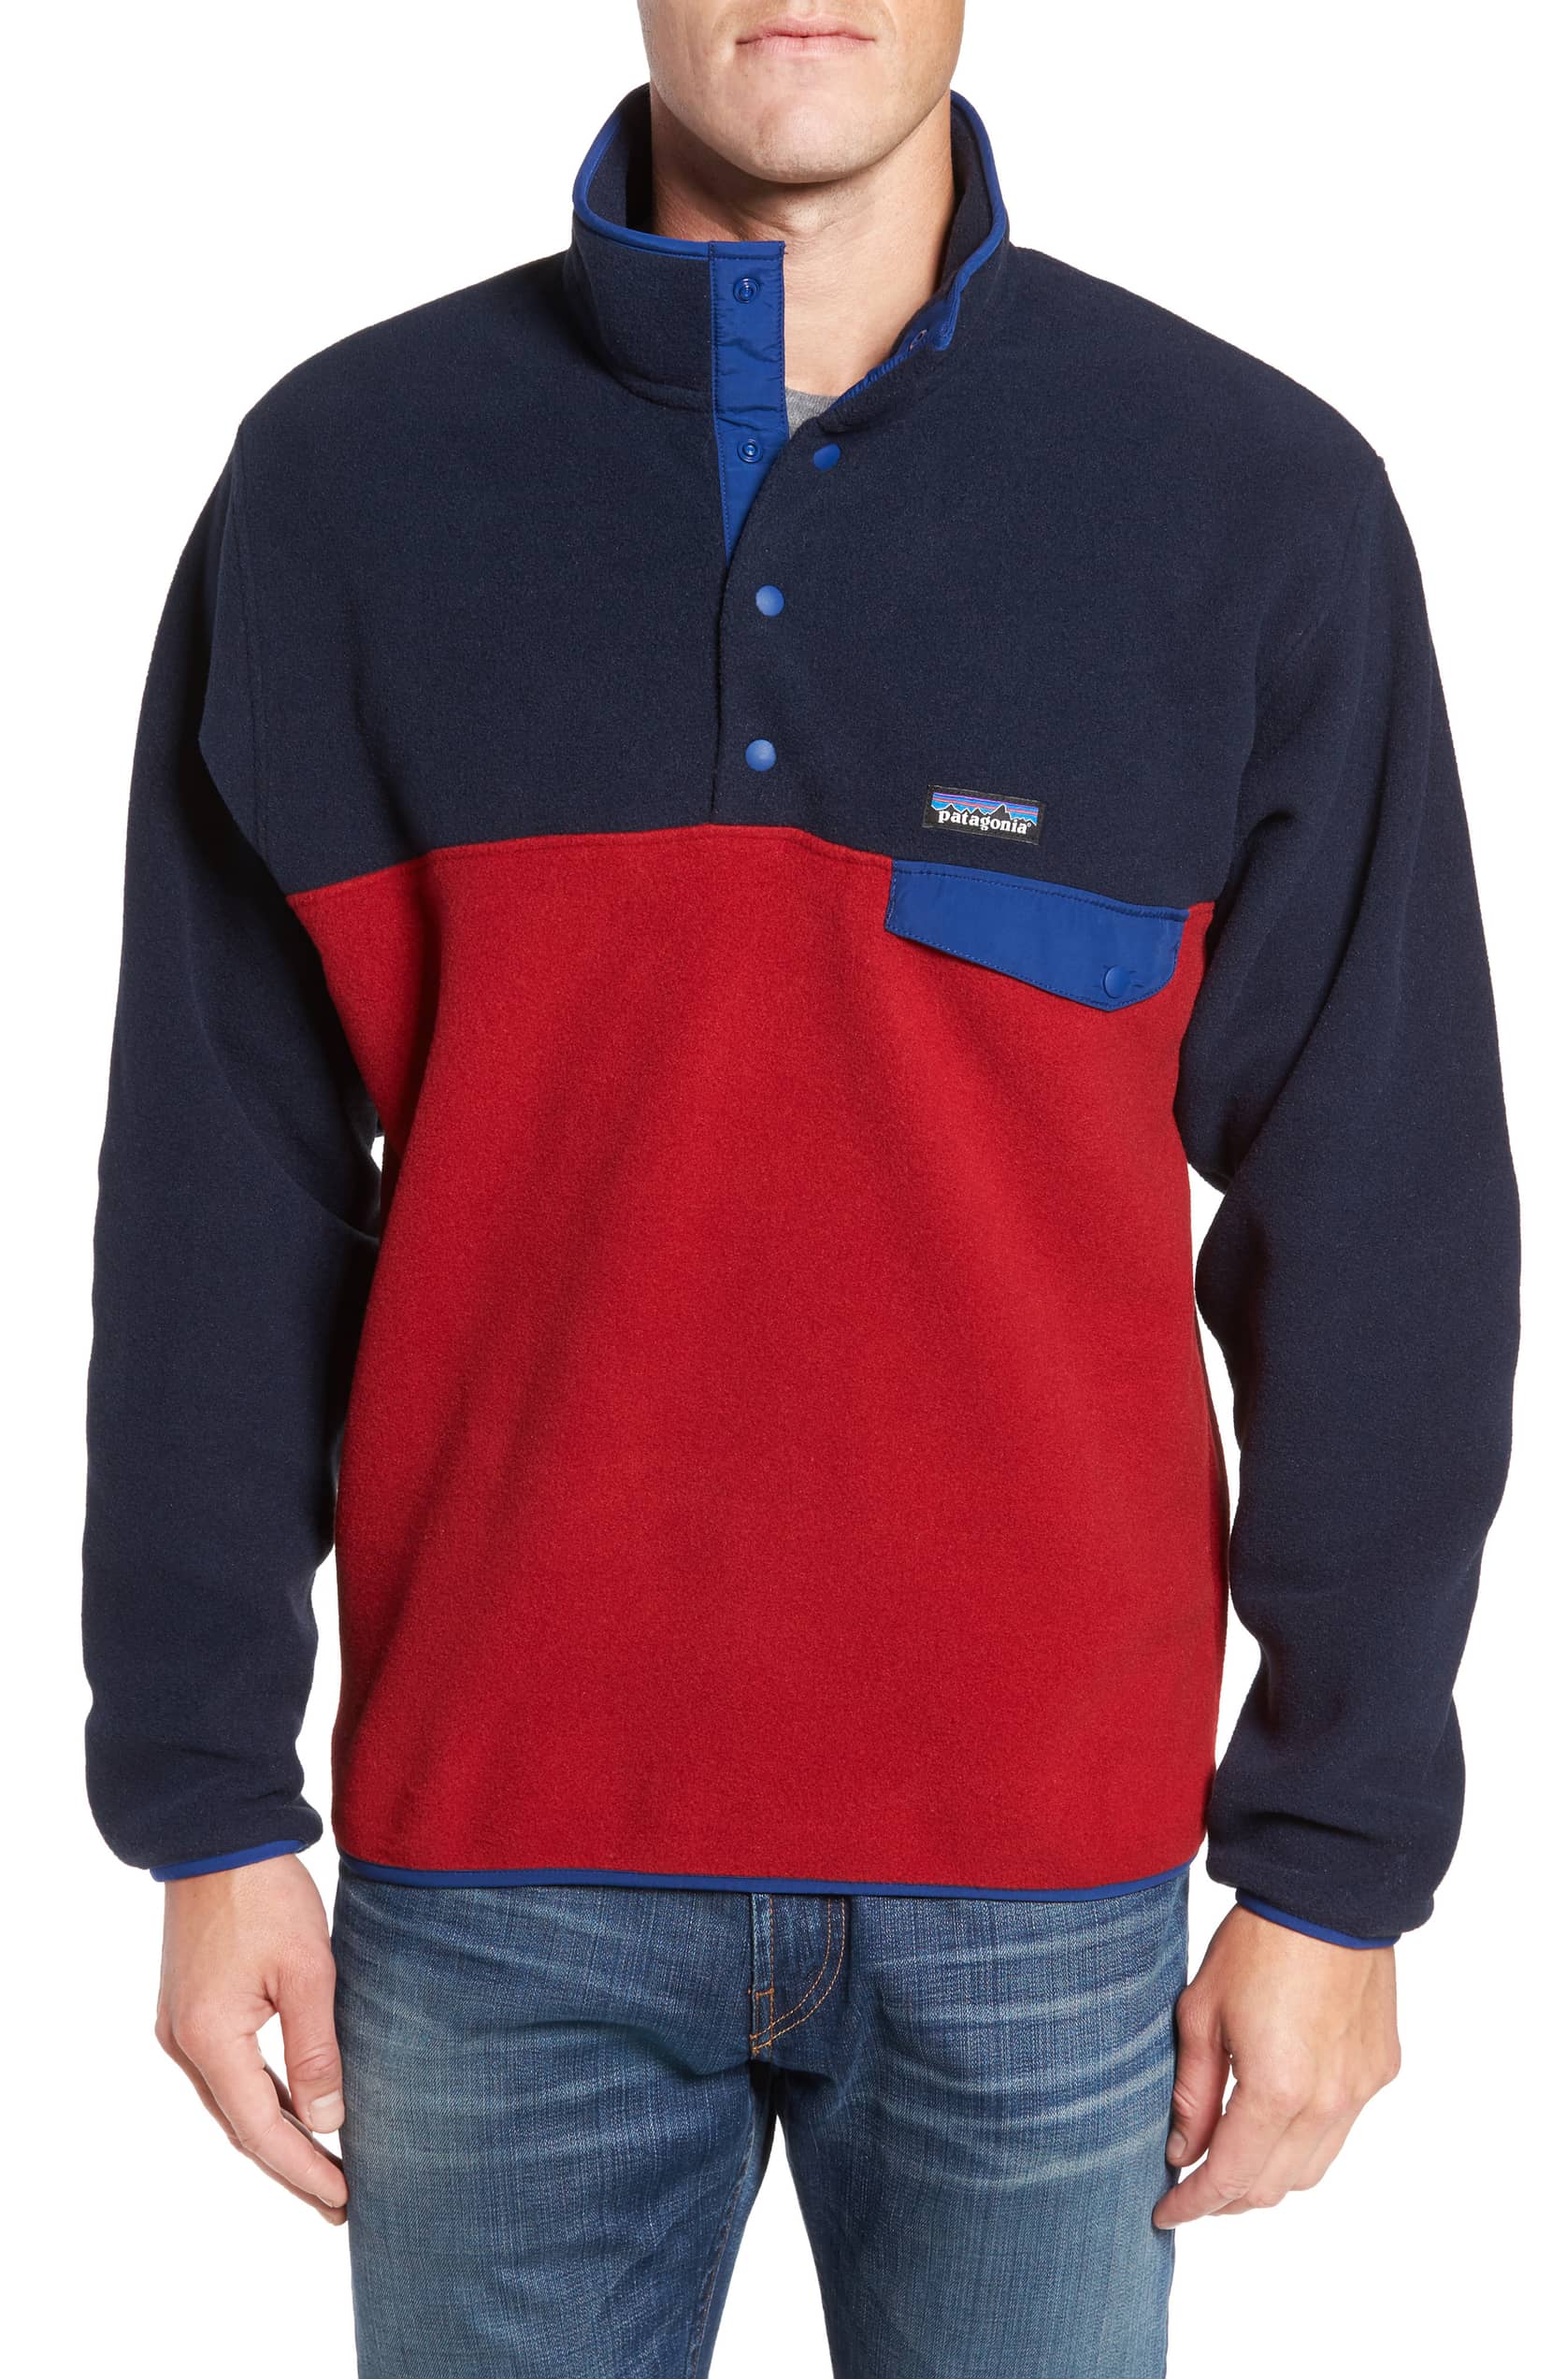 patagonia-mens-fleece-pullover-snap-t-navy-blue-red - Katie Considers